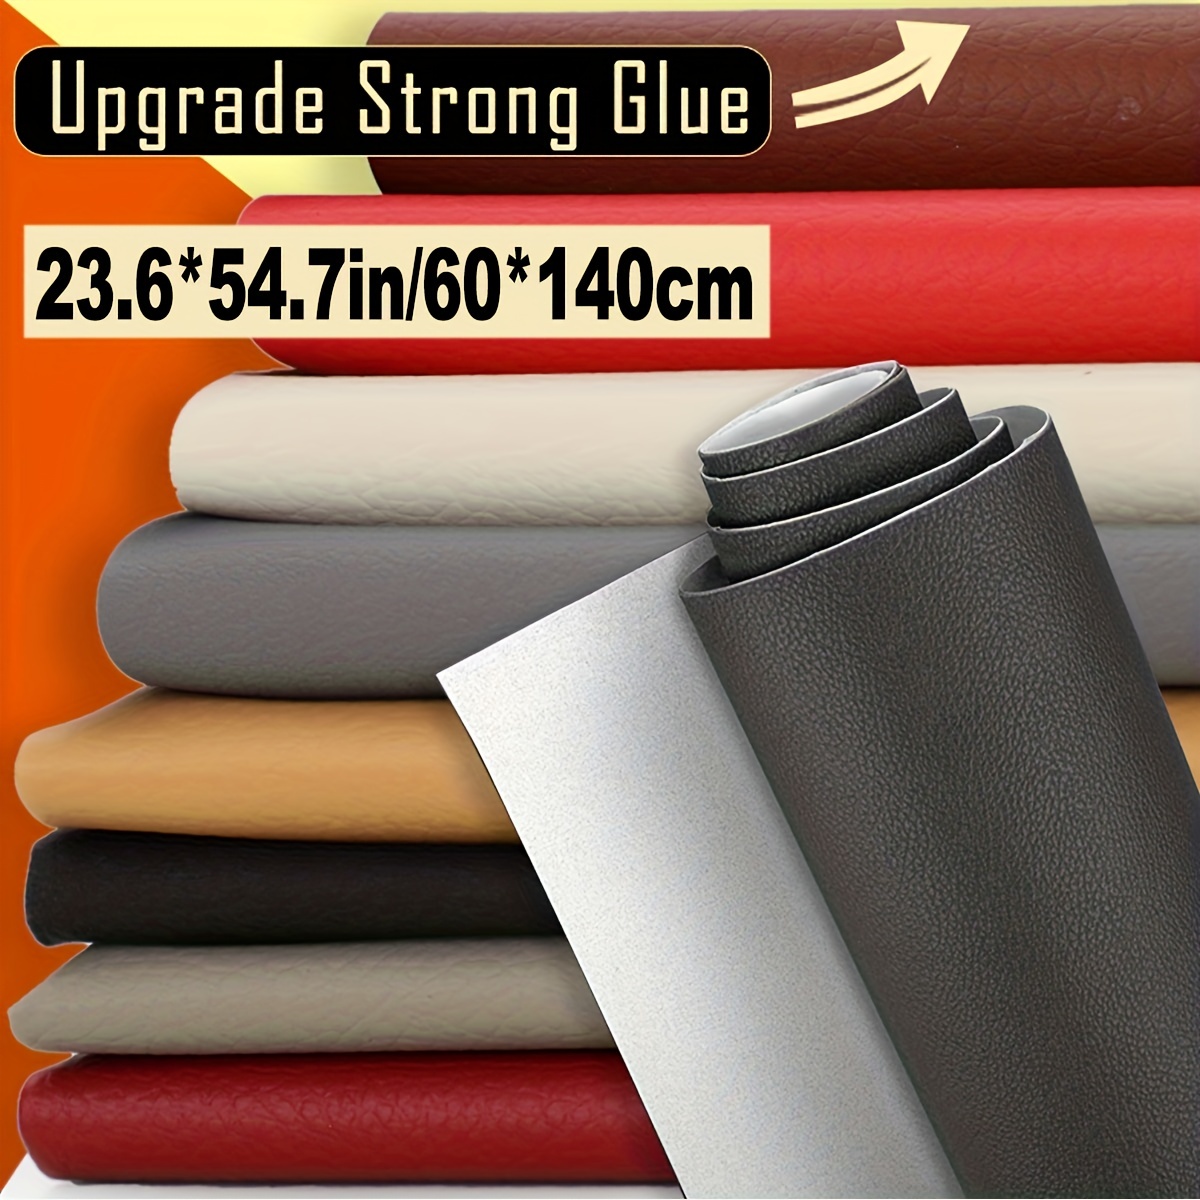 1 Roll PU Leather Repair Tape Self-Adhesive Leather Repair Patch Couches  Repair Stickers for Sofas Bags Furniture Driver Seats - AliExpress